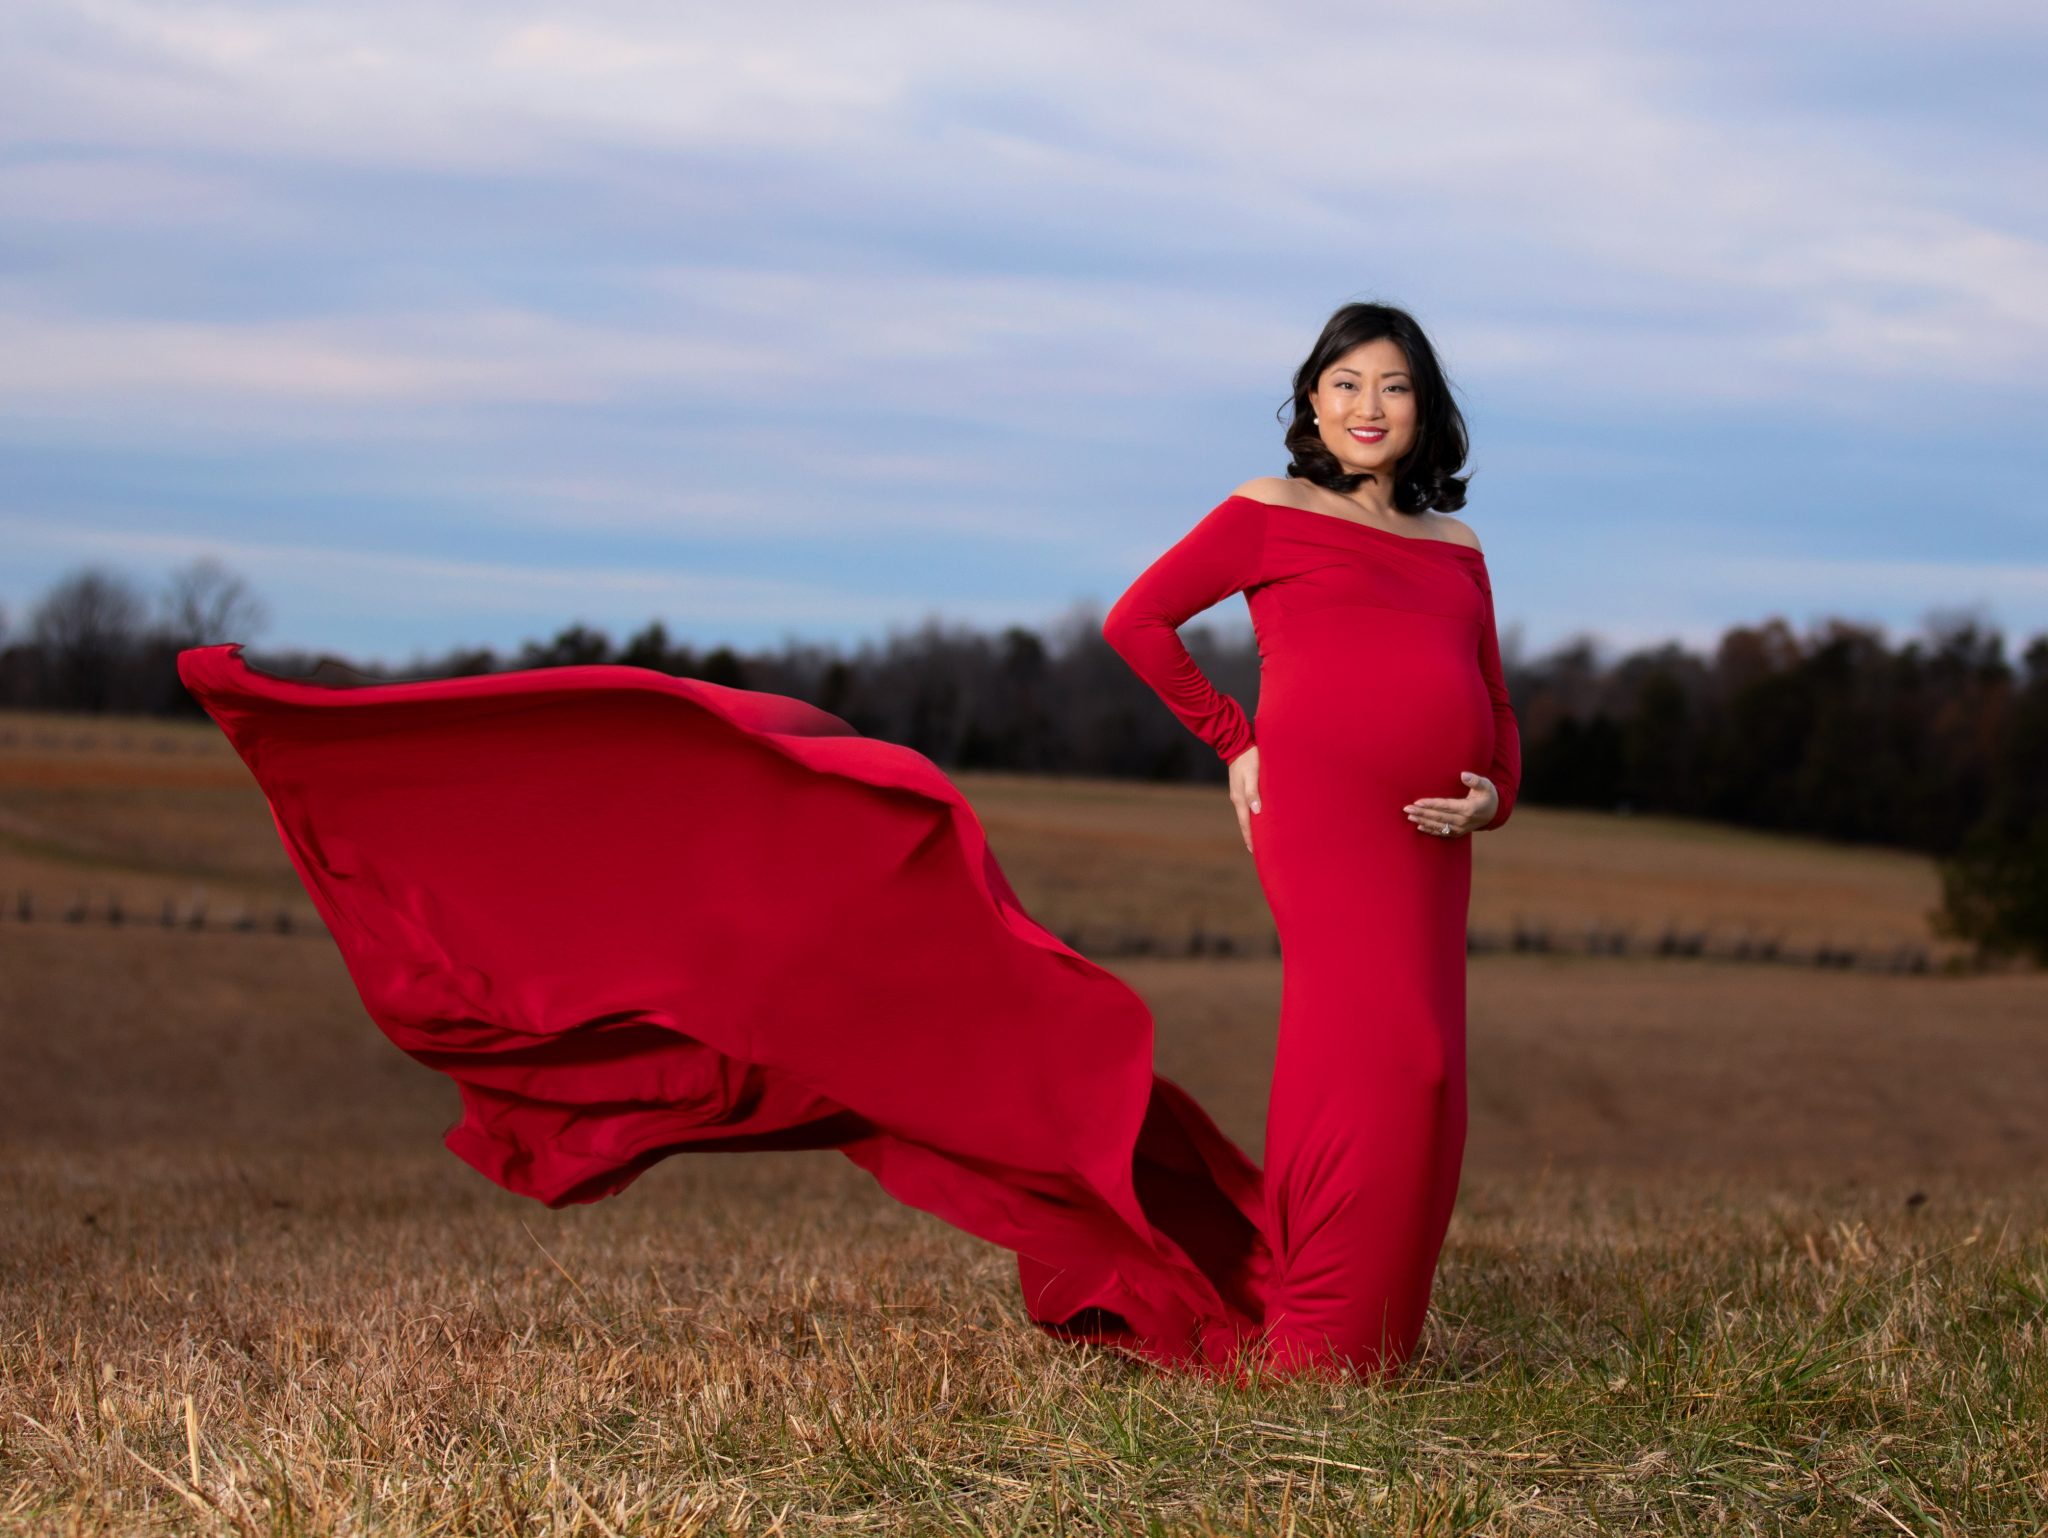 newborn and maternity photography in laurel, MD by a pregnancy photographer in Baltimore.